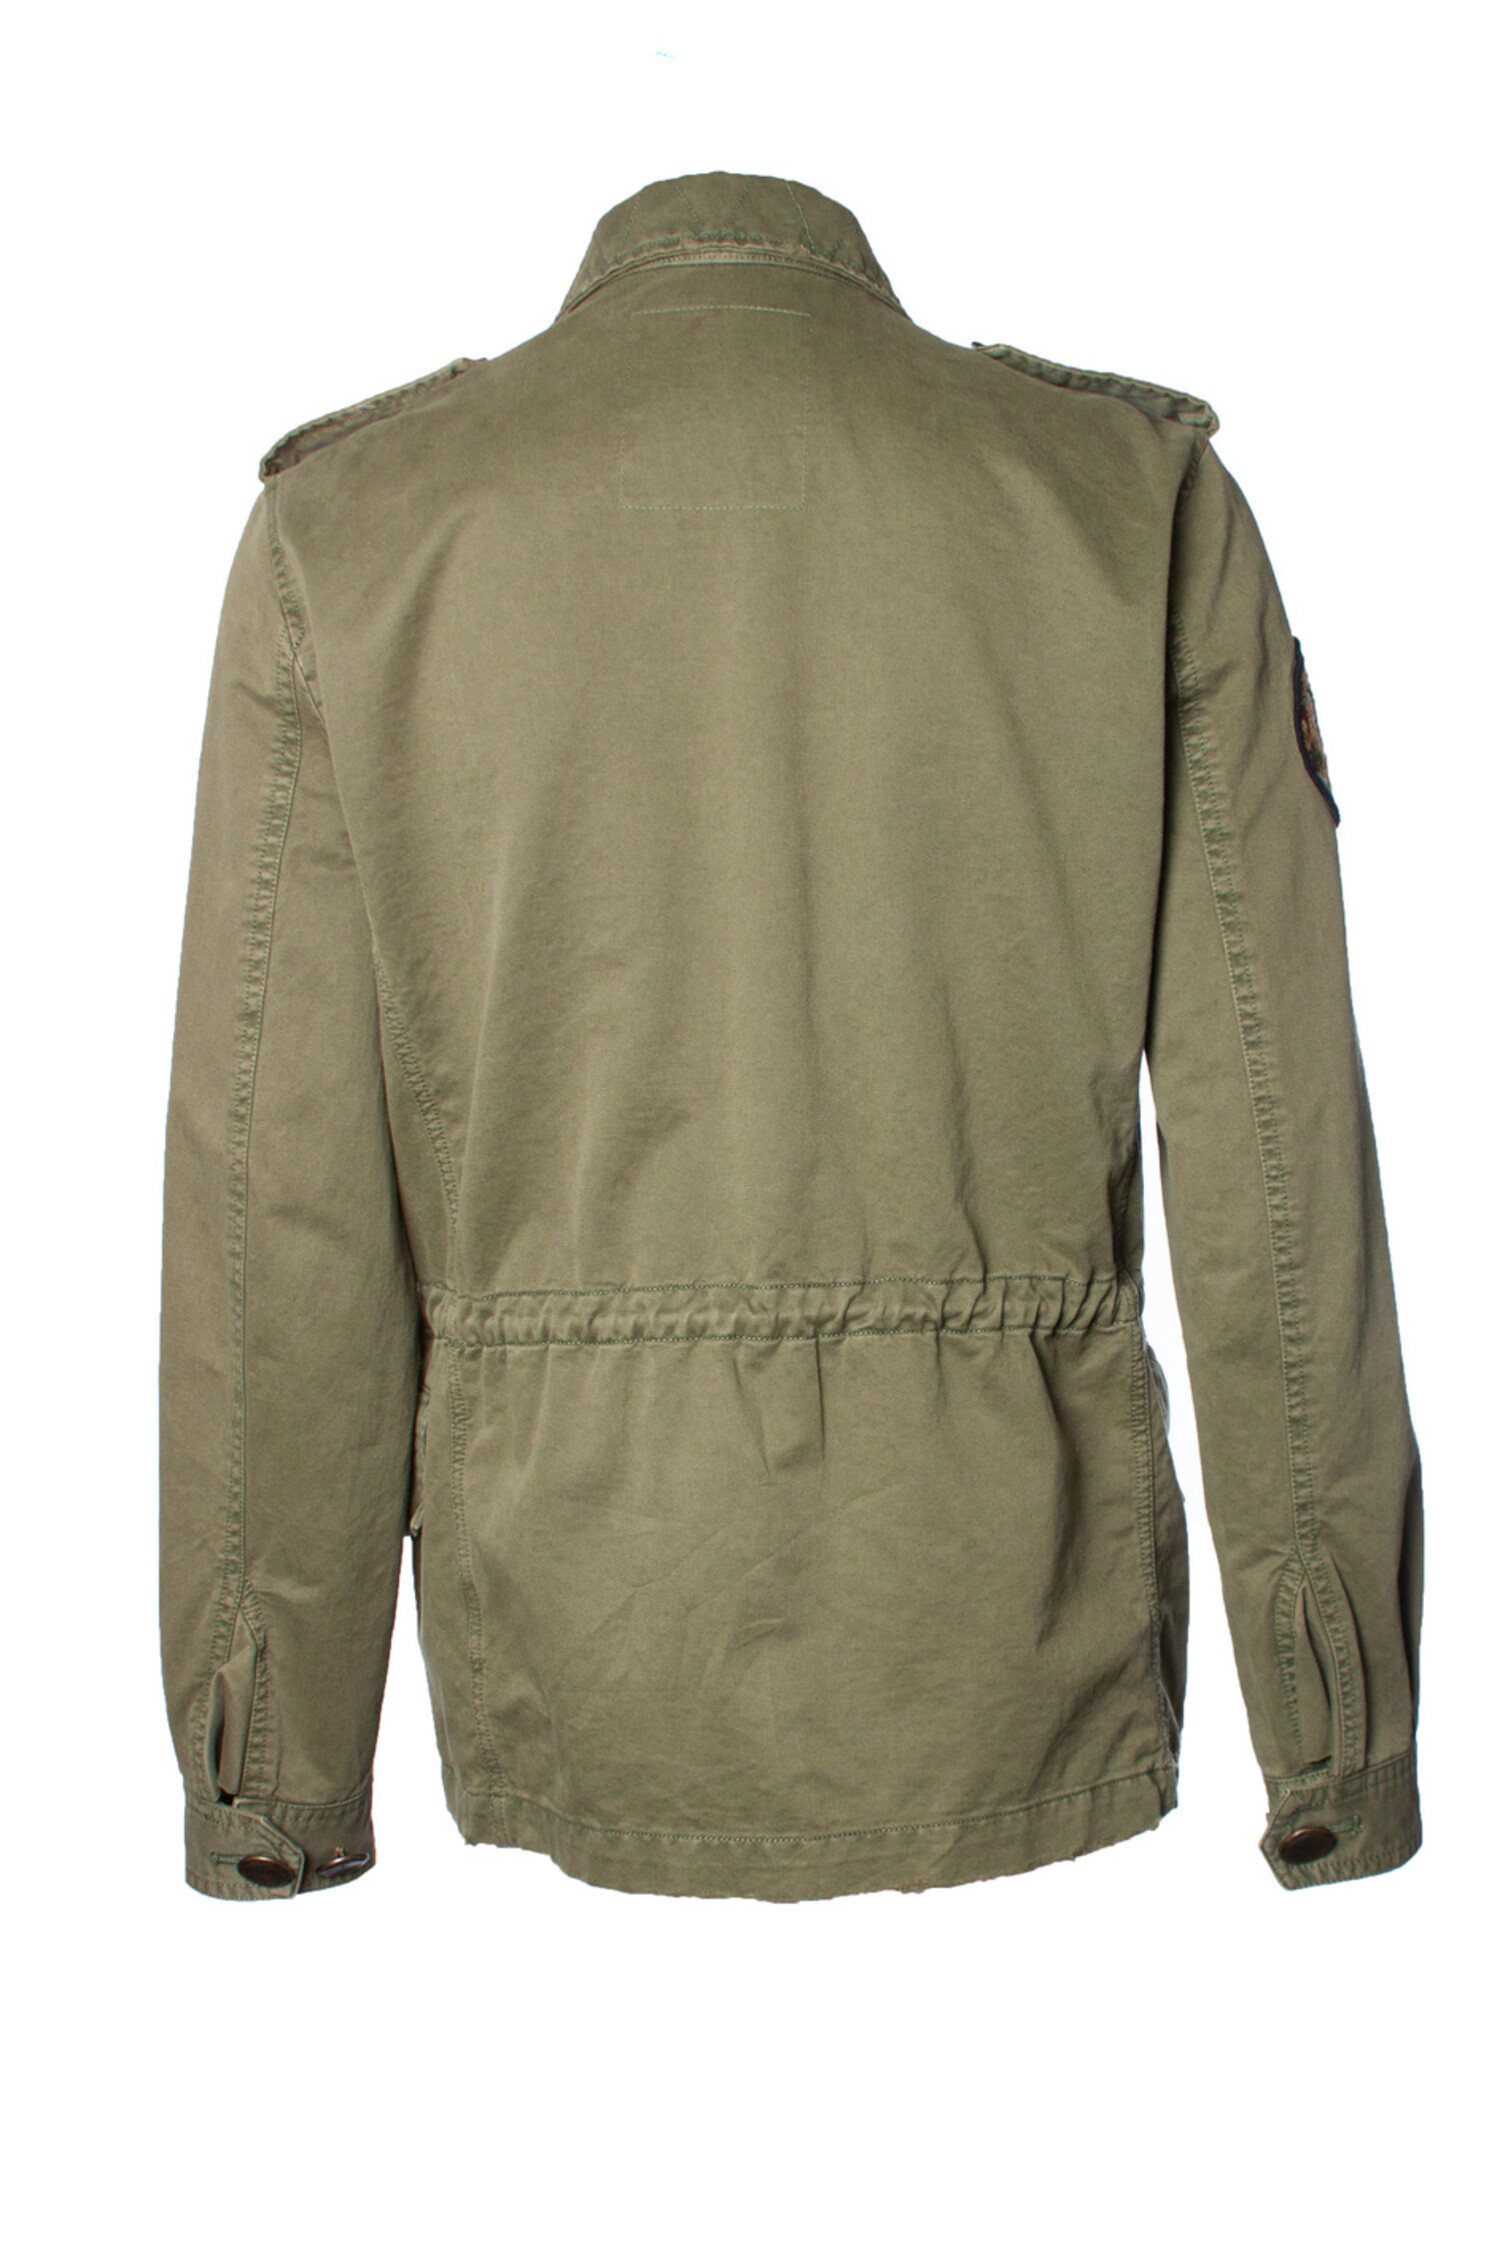 Levi's Modern Fit Washed Cotton Military Jacket | All Sale| Men's Wearhouse